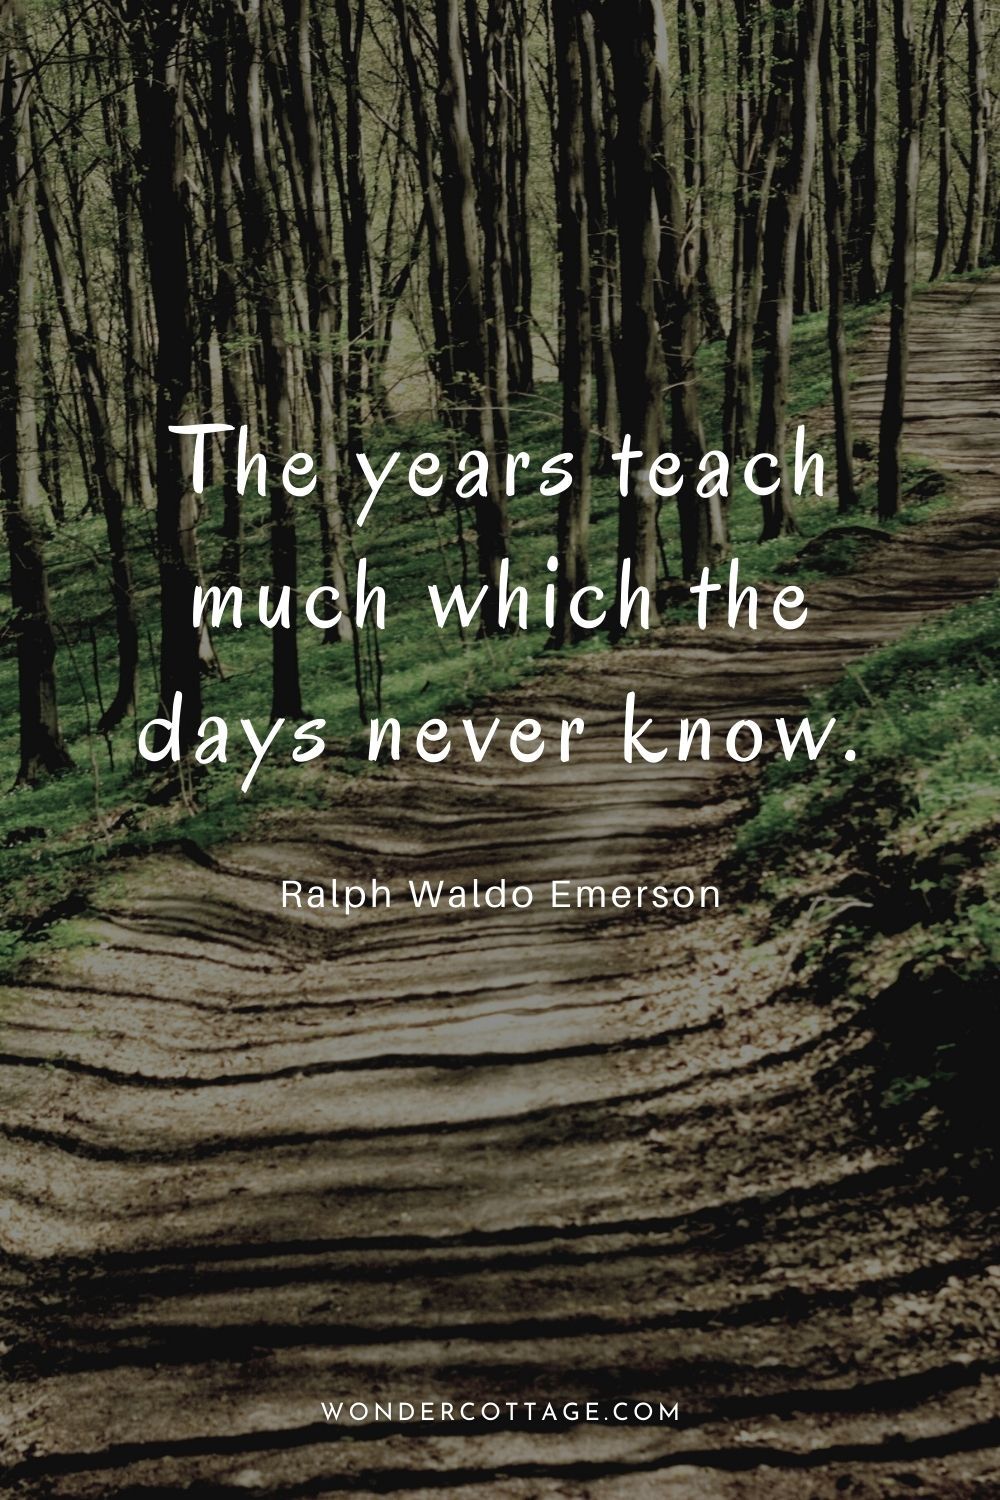 The years teach much which the days never know.  Ralph Waldo Emerson